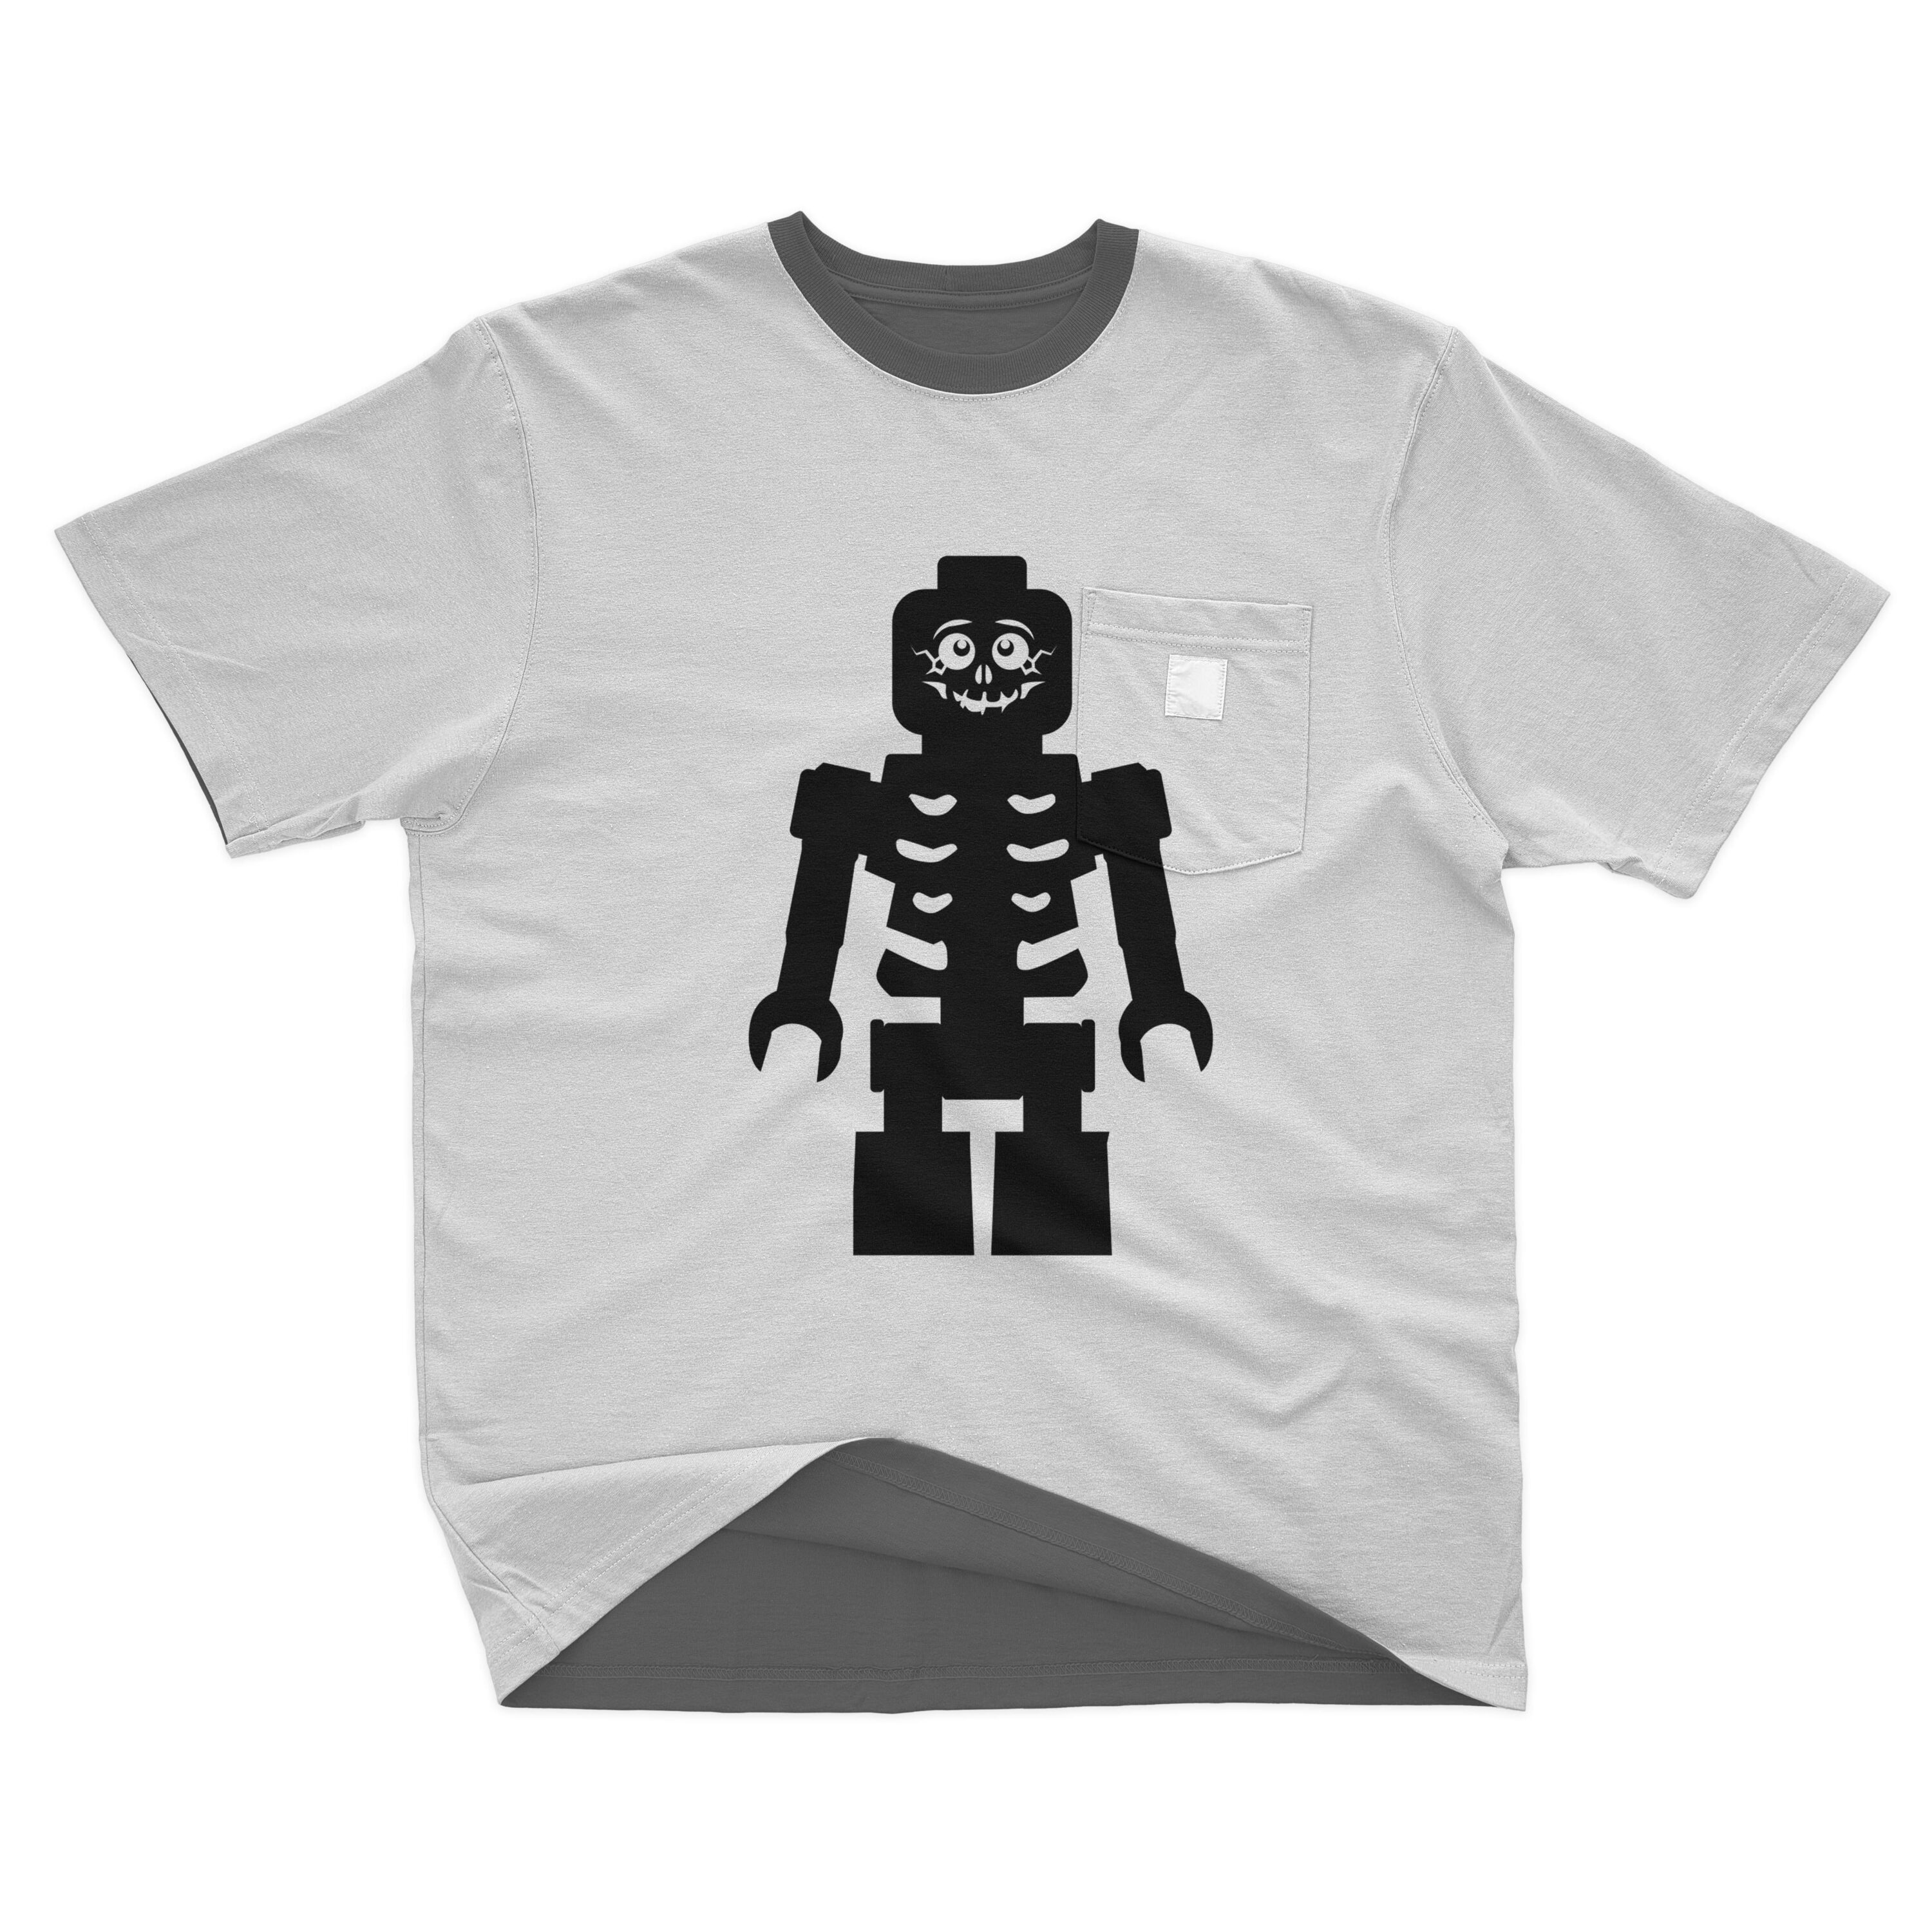 Silhouette lego printed on the t-shirt.